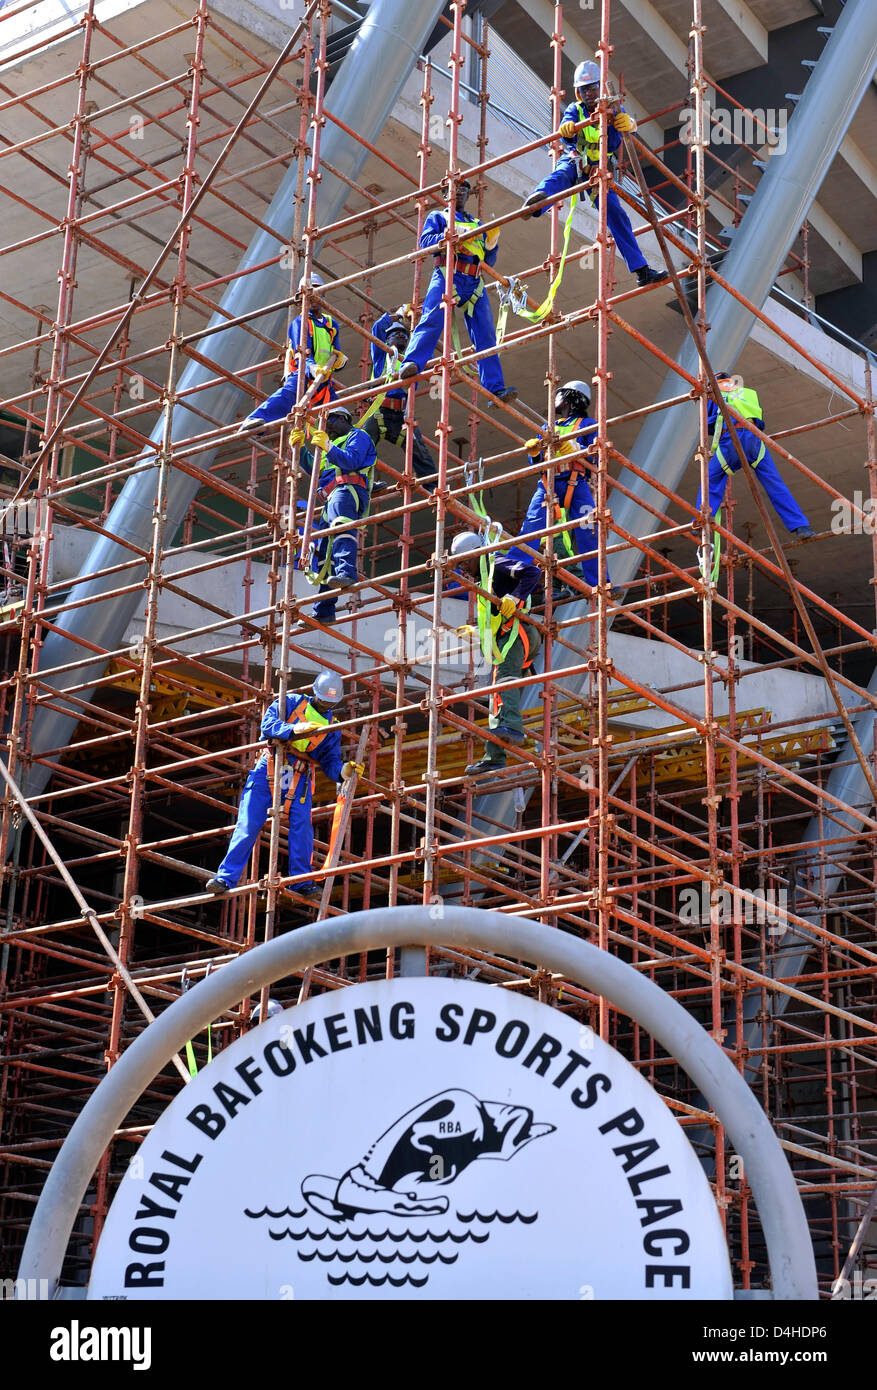 View on the construction site of the Royal Bafokeng stadium on Rustenburg, South Africa, 25 November 2008. The stadium should be a venue for both the 2009 FIFA Confederations Cup and the 2010 FIFA World Cup South Africa. Photo: Gero Breloer Stock Photo